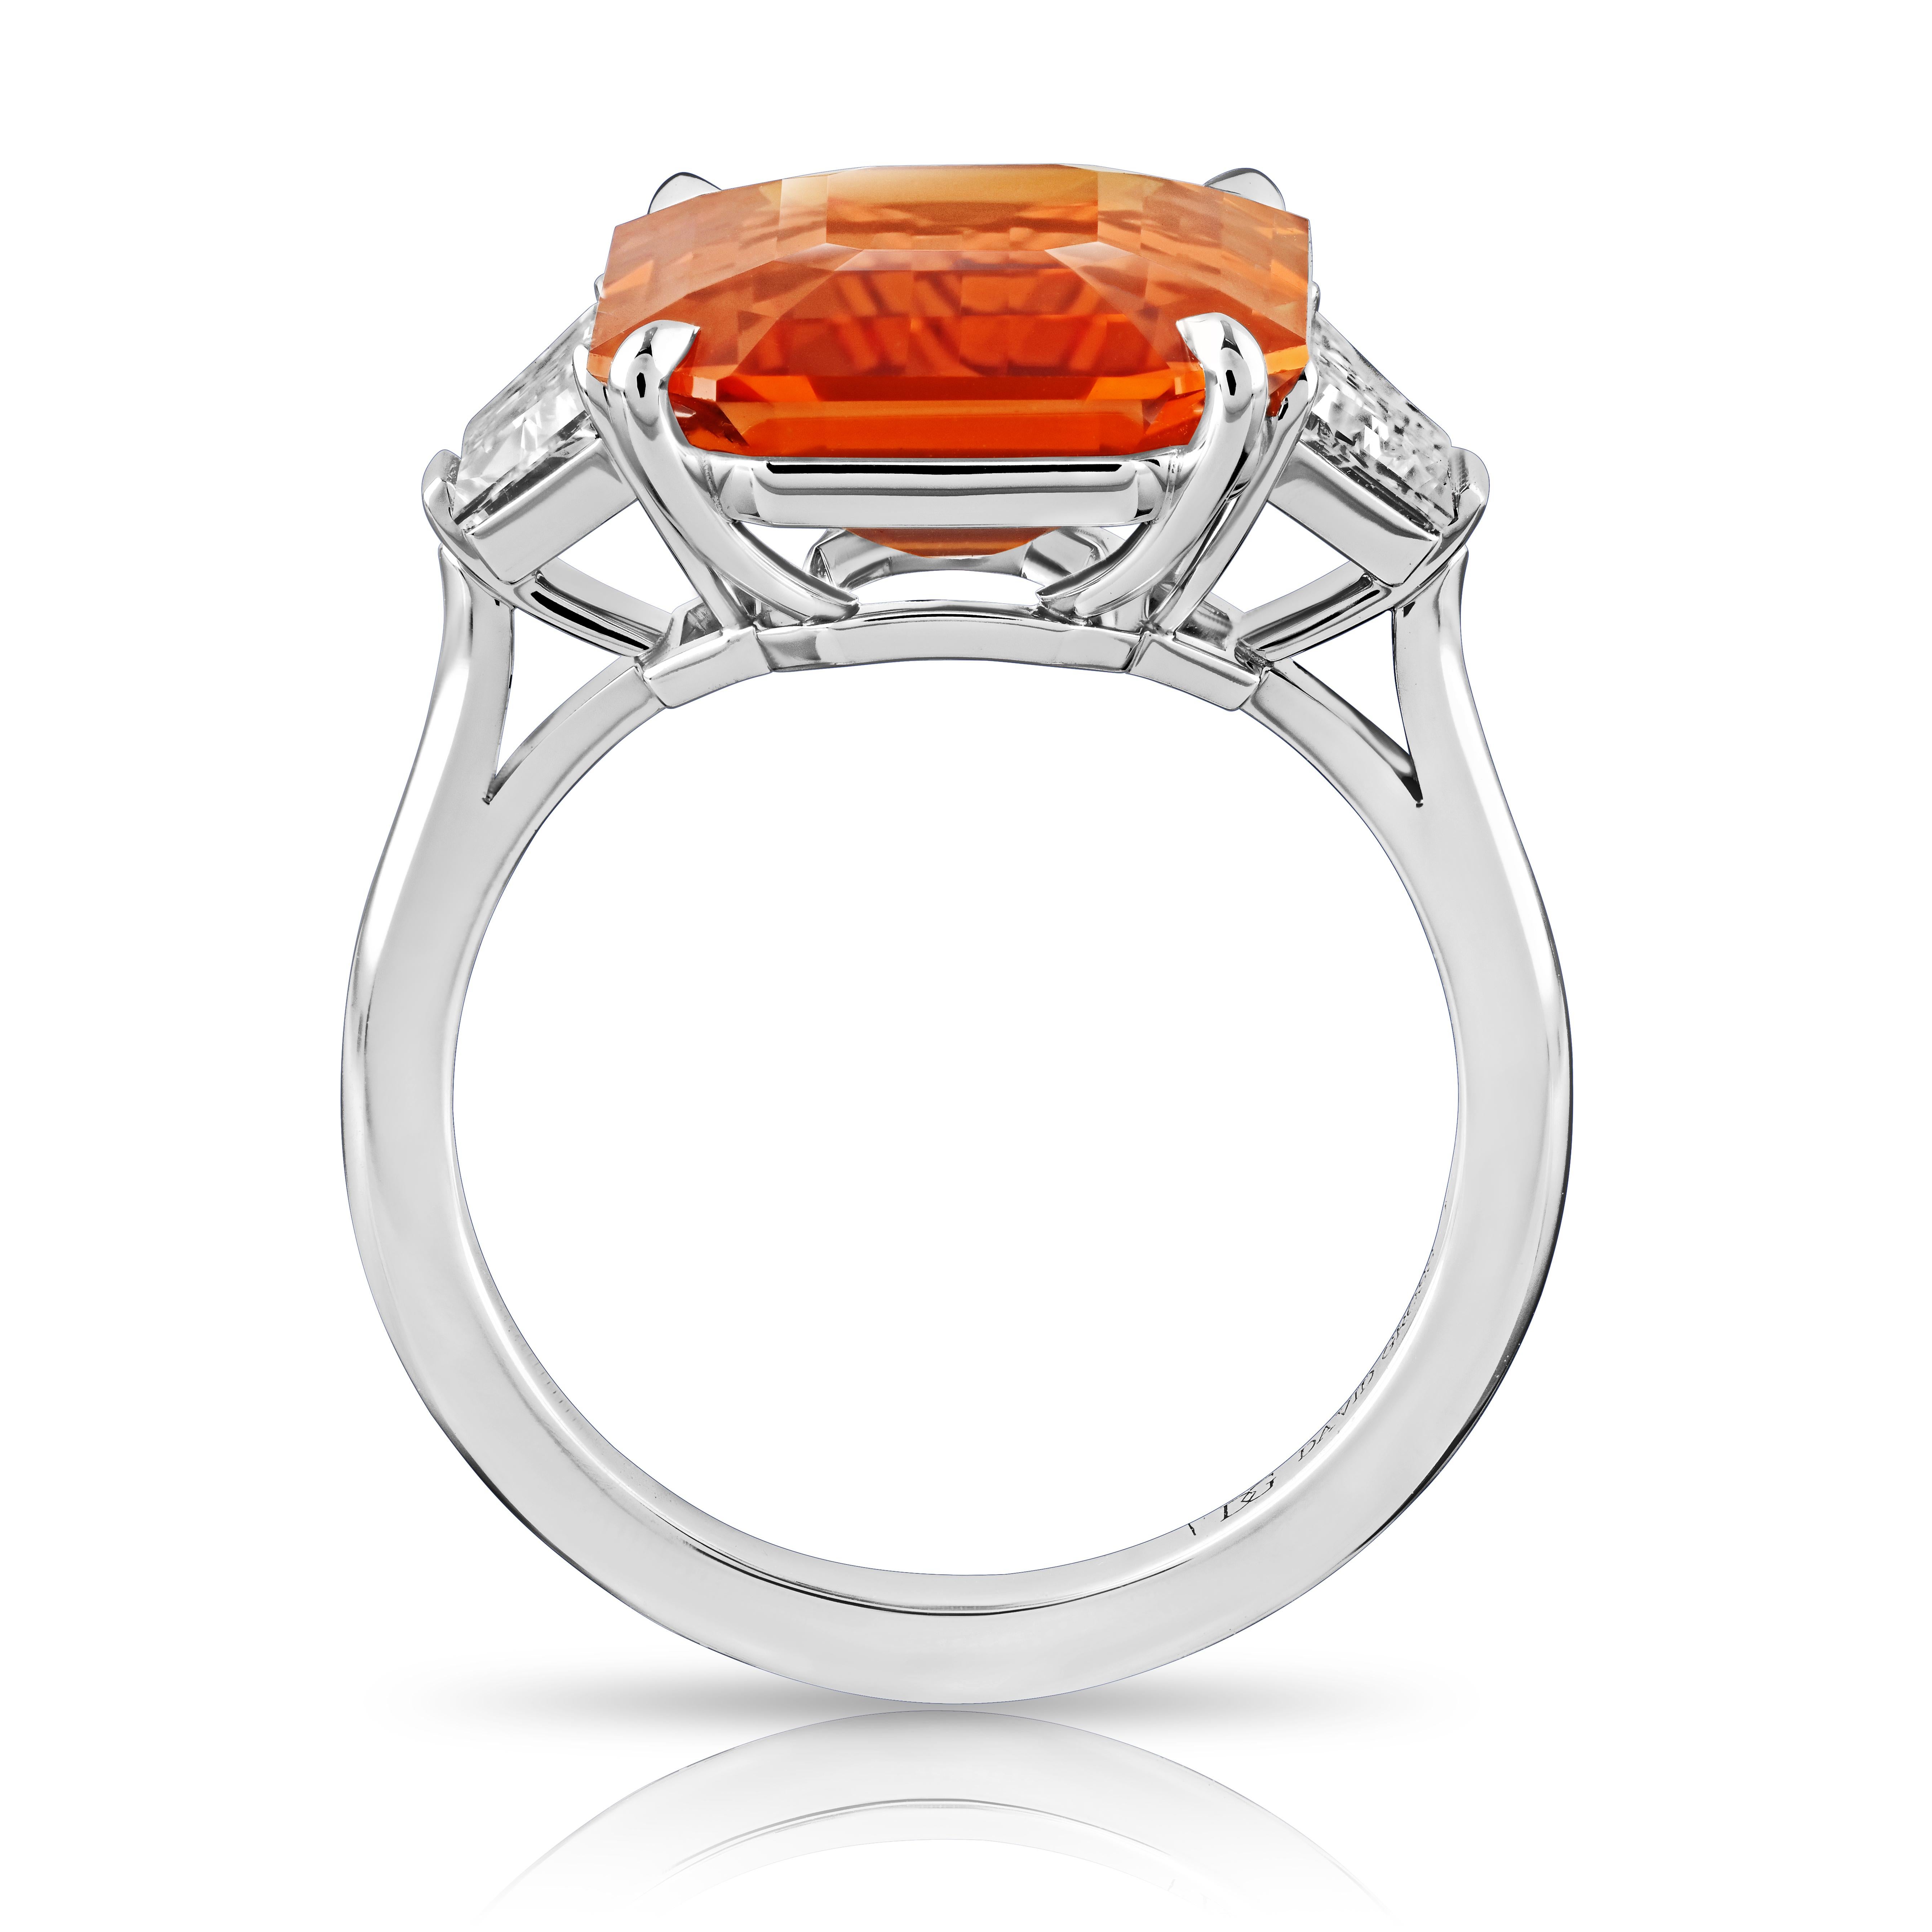 10.53 carat Emerald Cut Orange Sapphire with two Trapezoid Step Cut Diamonds 1.02 carats set in a handmade Platinum ring